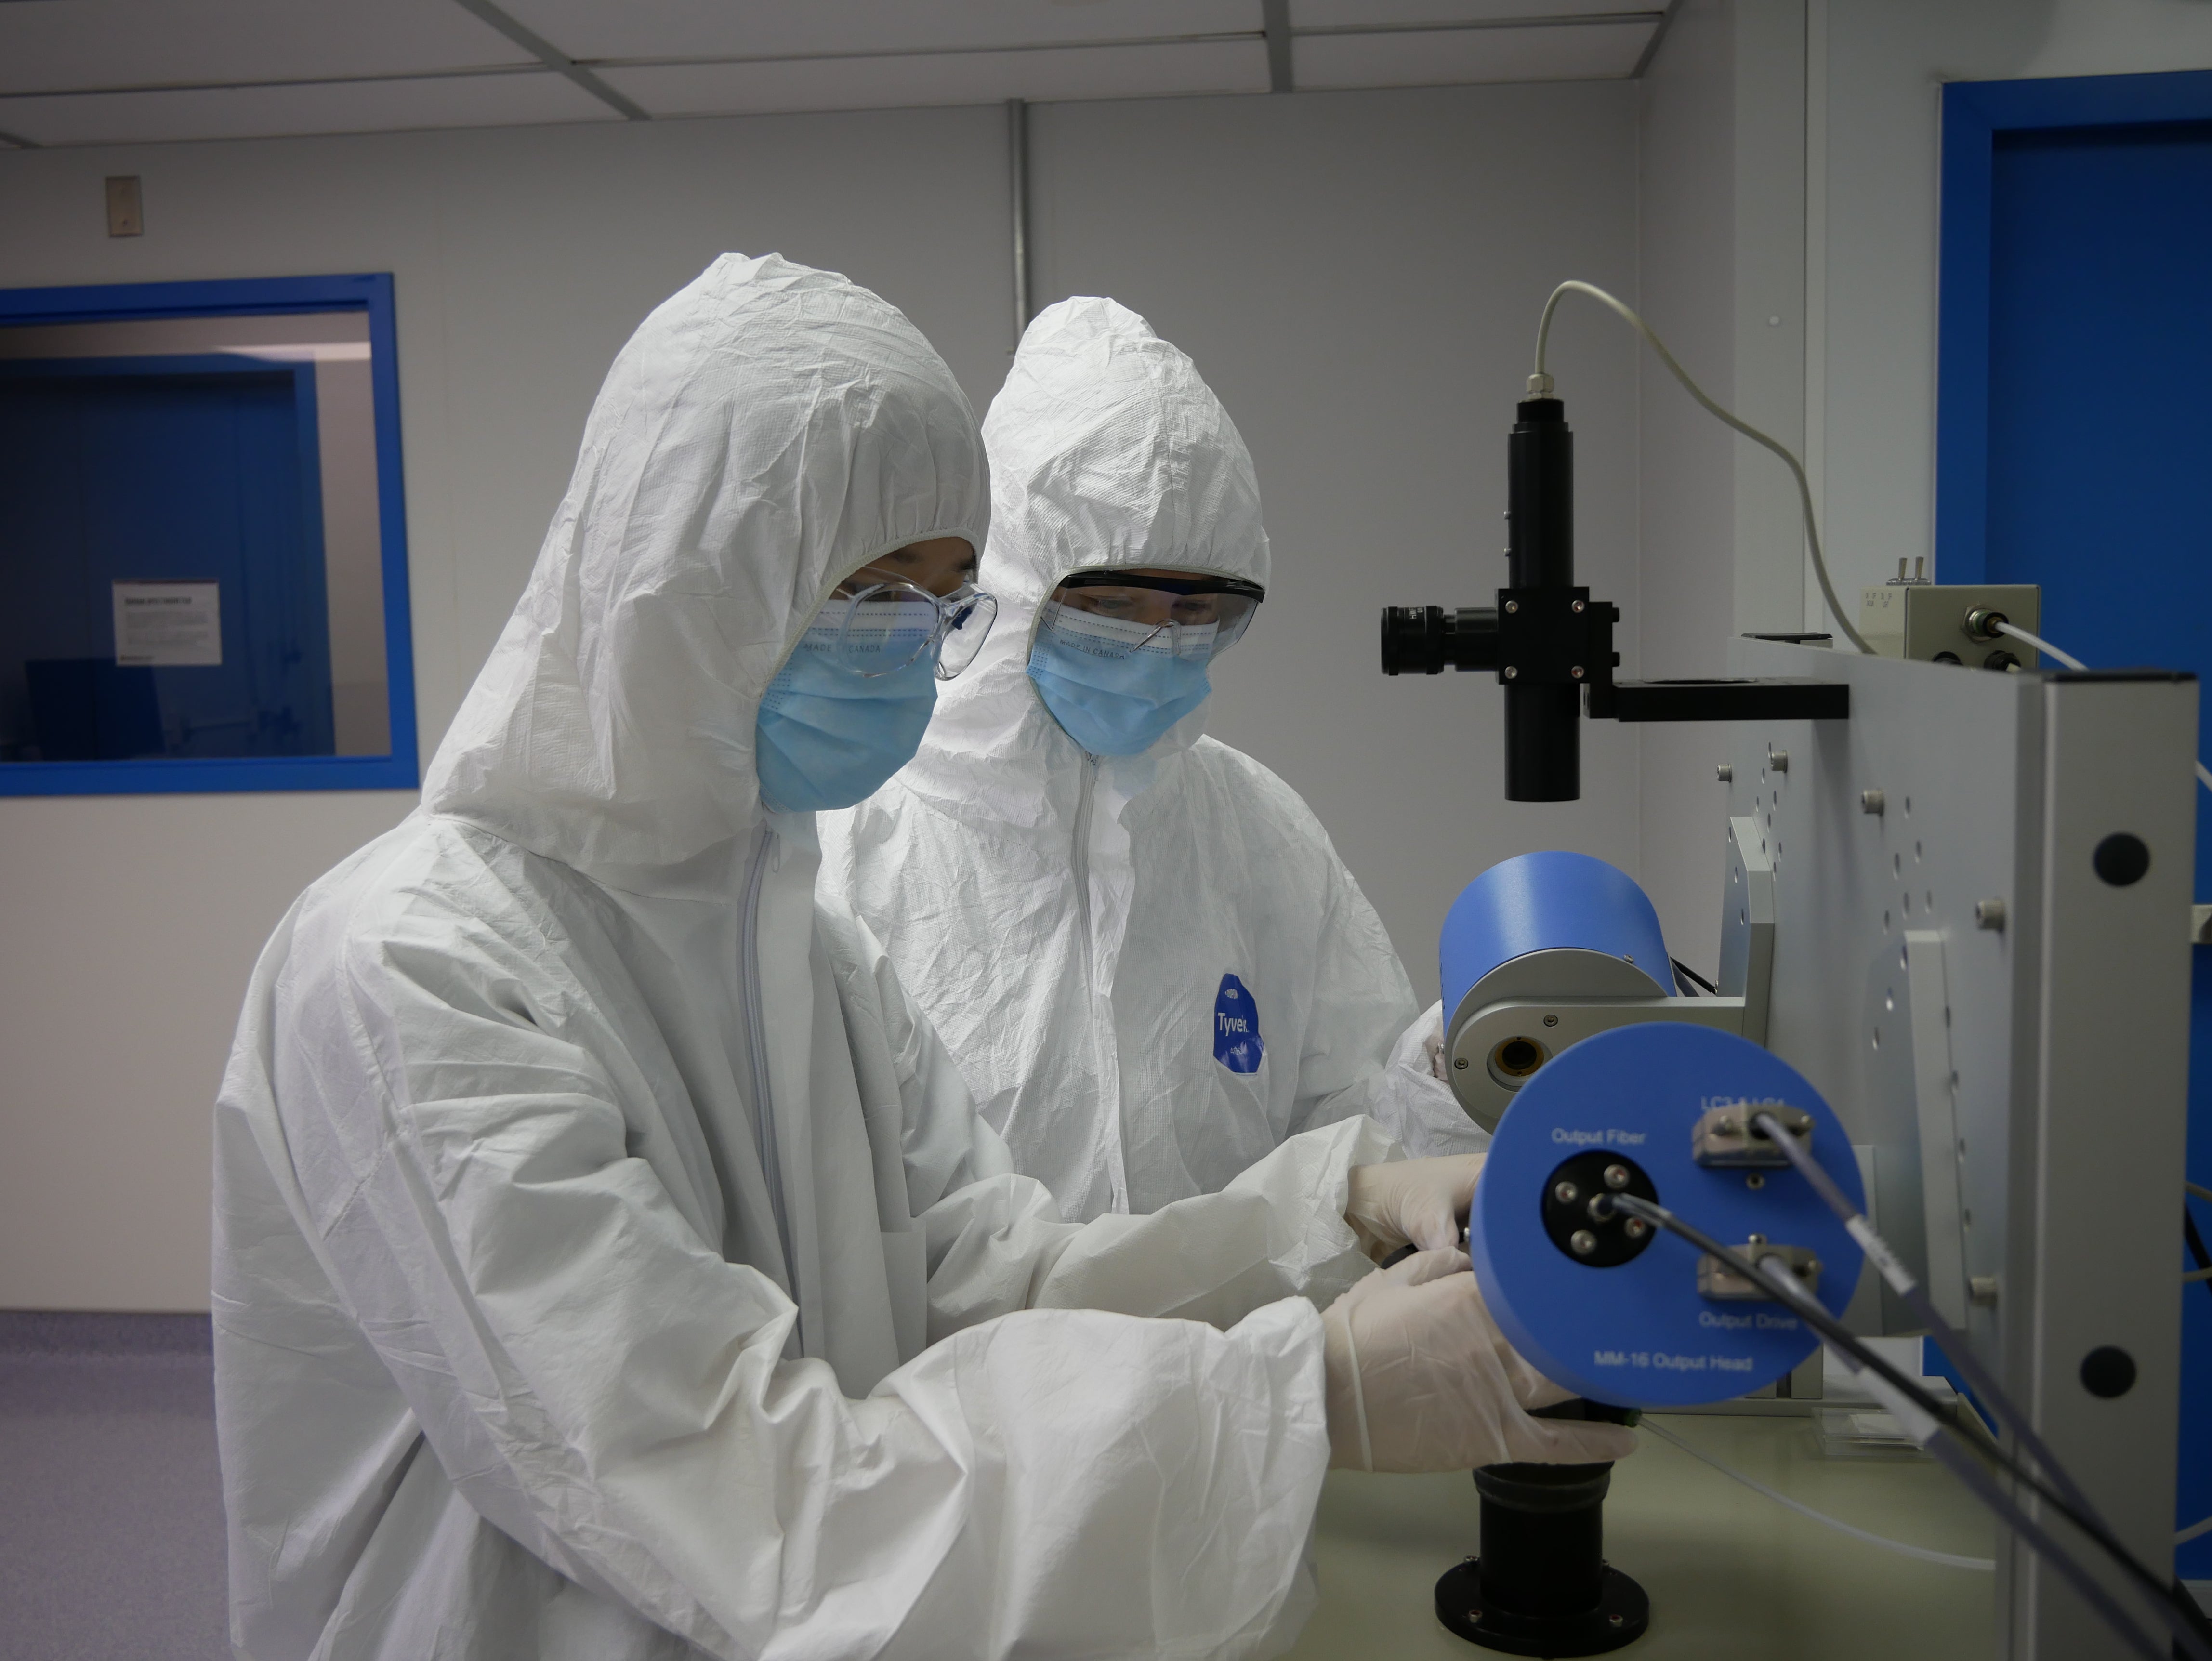 Technicians in cleanroom suits working on equipment